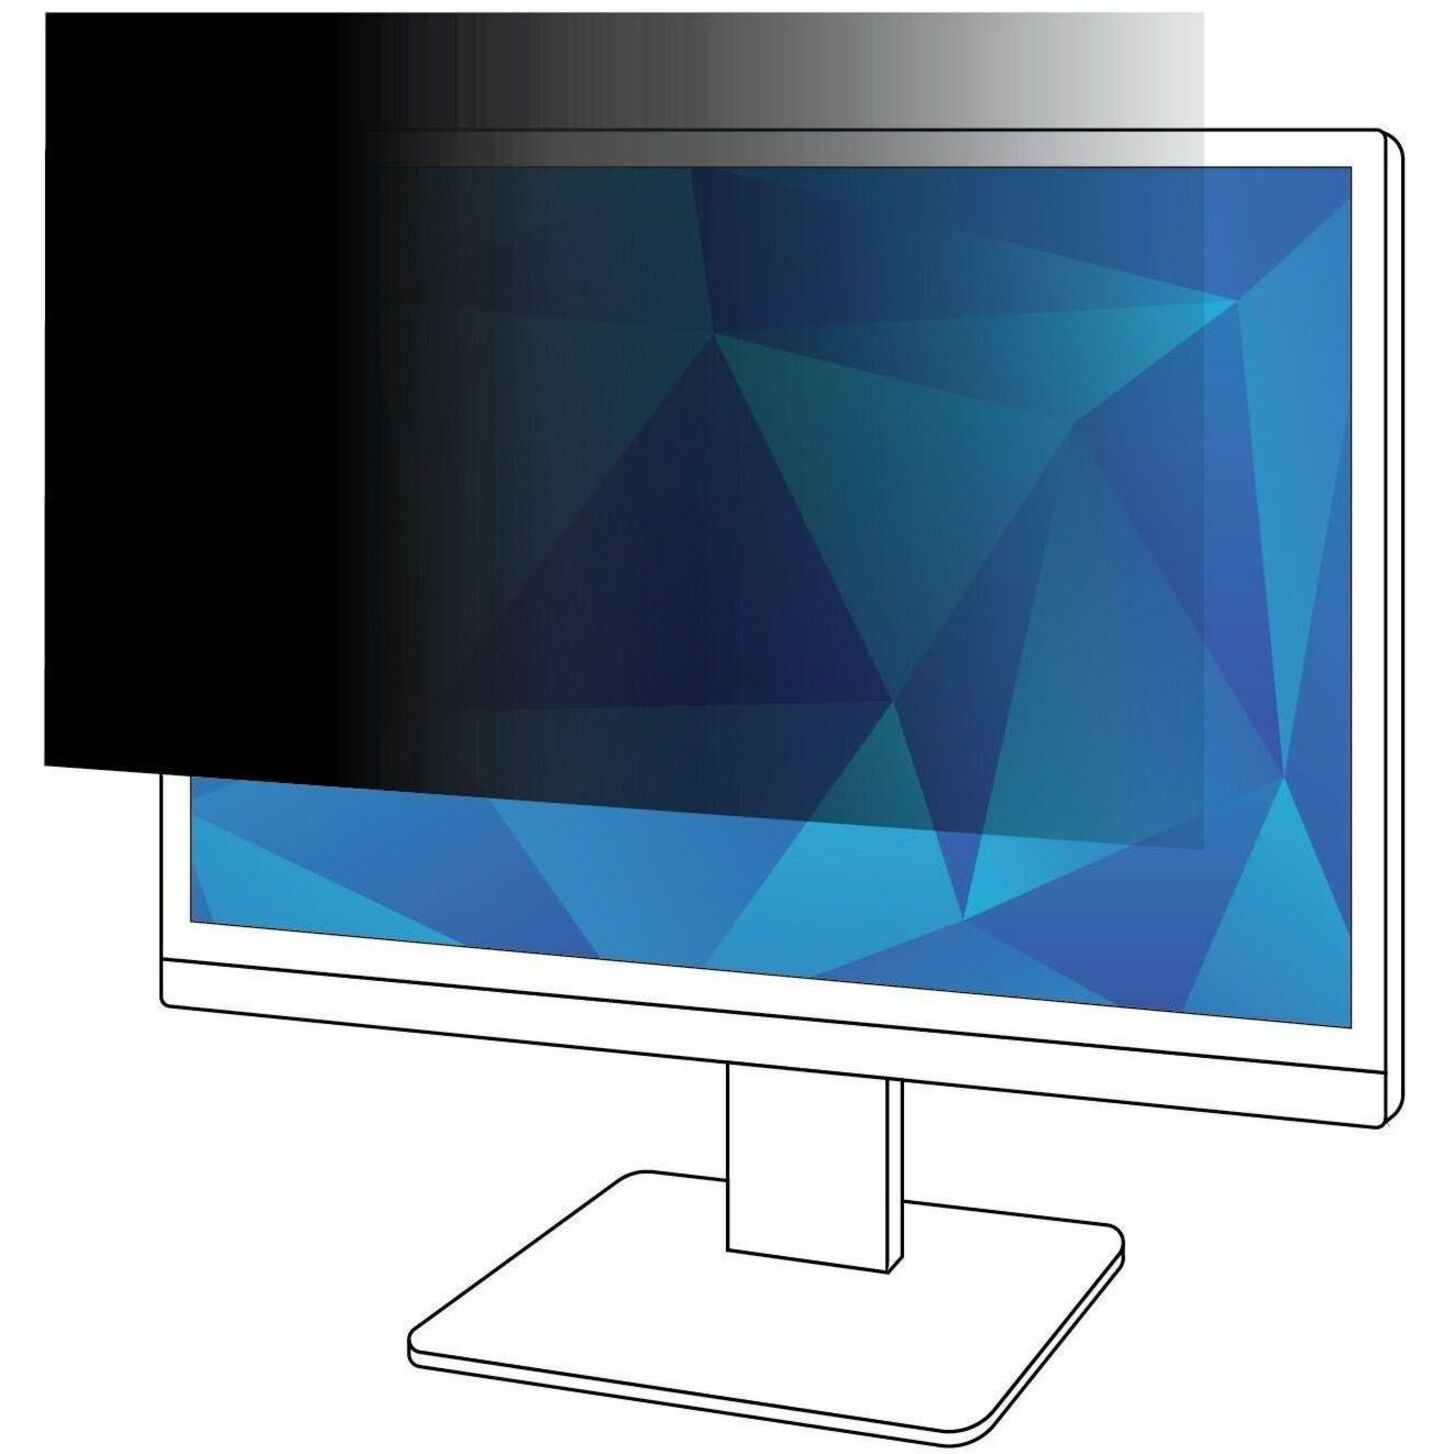 3M PF170C4B Privacy Filter for Laptop/LCD Monitor, 17.0", Easy to Apply, Easy Clean, Reversible Glossy-to-Anti-glare, Blue Light Reduction, Limited Viewing Angle, Matte Black